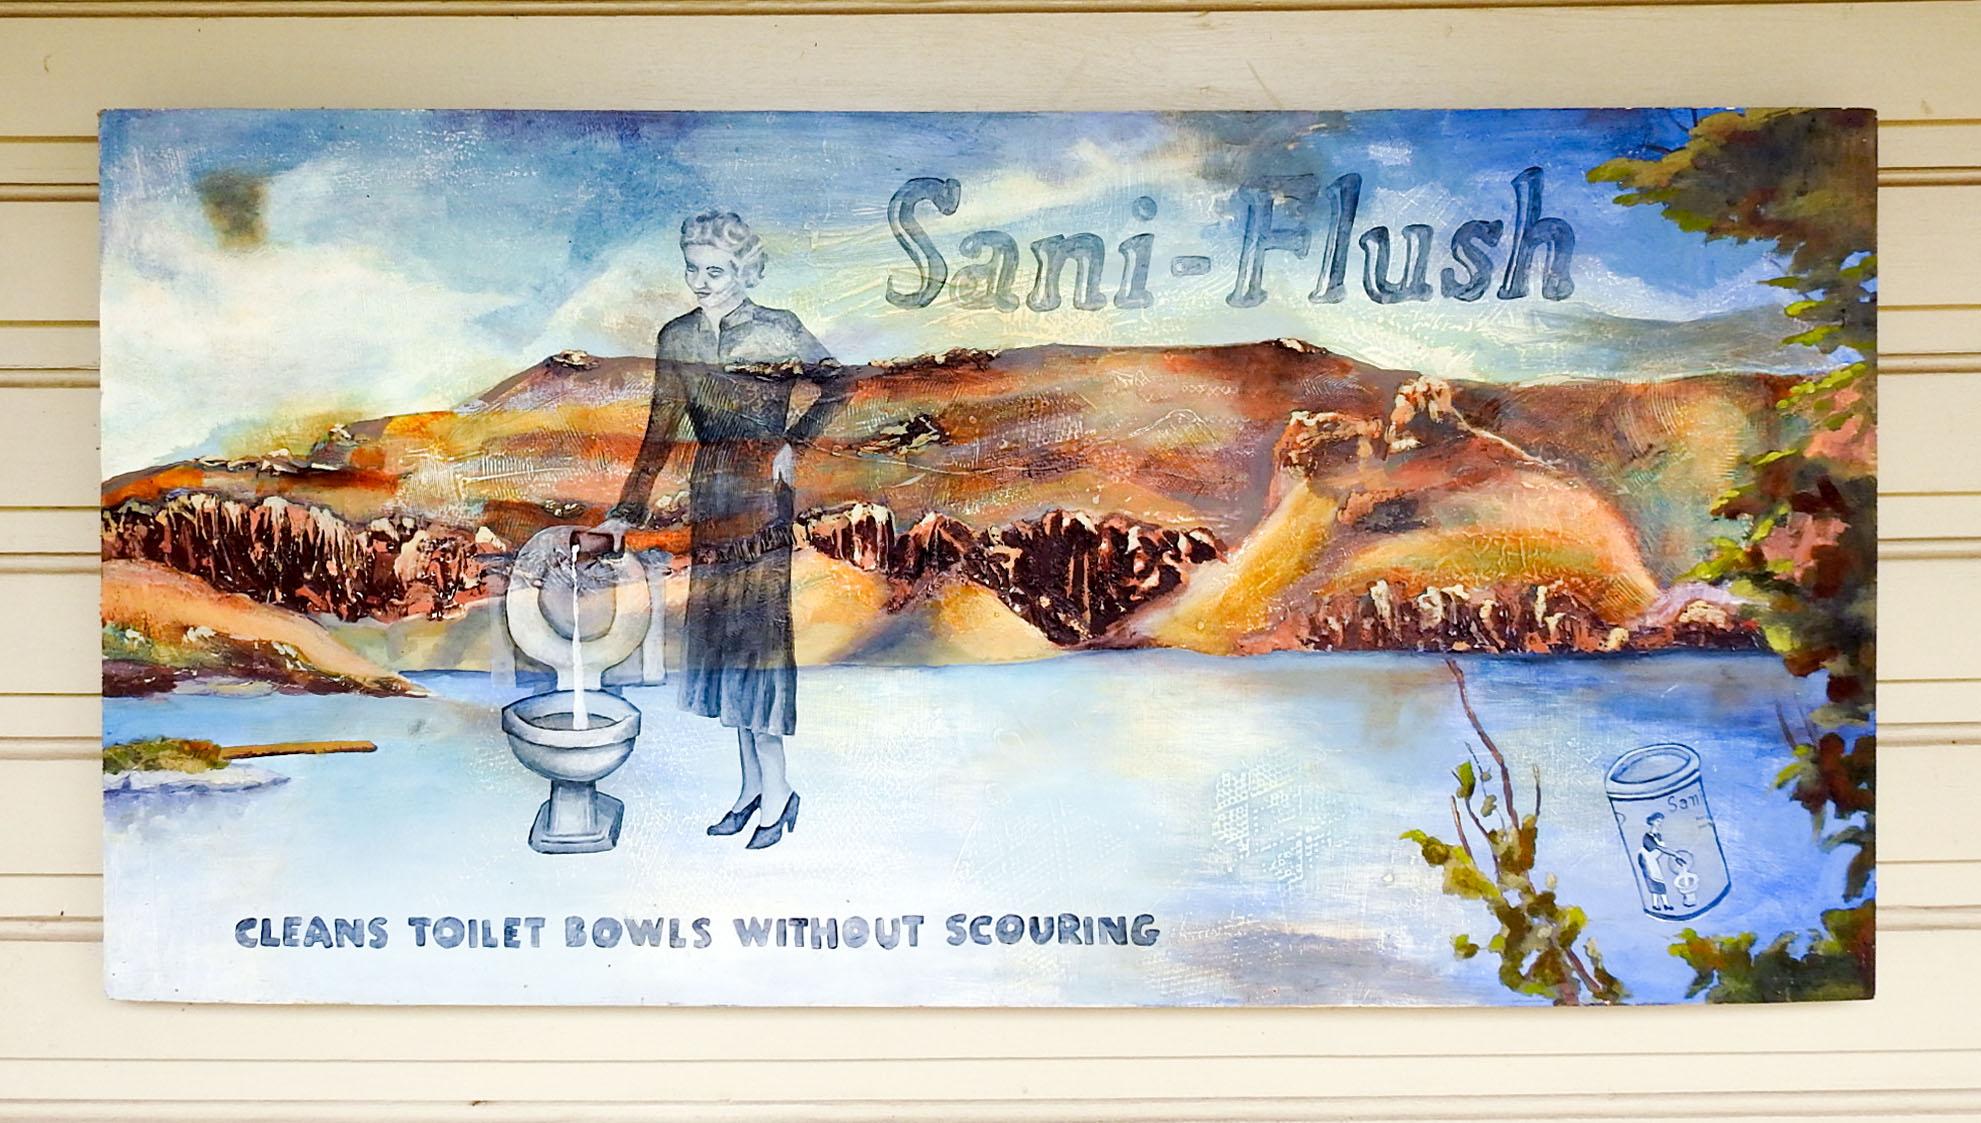 Vintage late 20th century oil on wood panel painting.  Woman, toilet, lake, mountains and Sani-Flush environmental protest statement painting.  Unsigned.  Unframed,  wood panel with 1